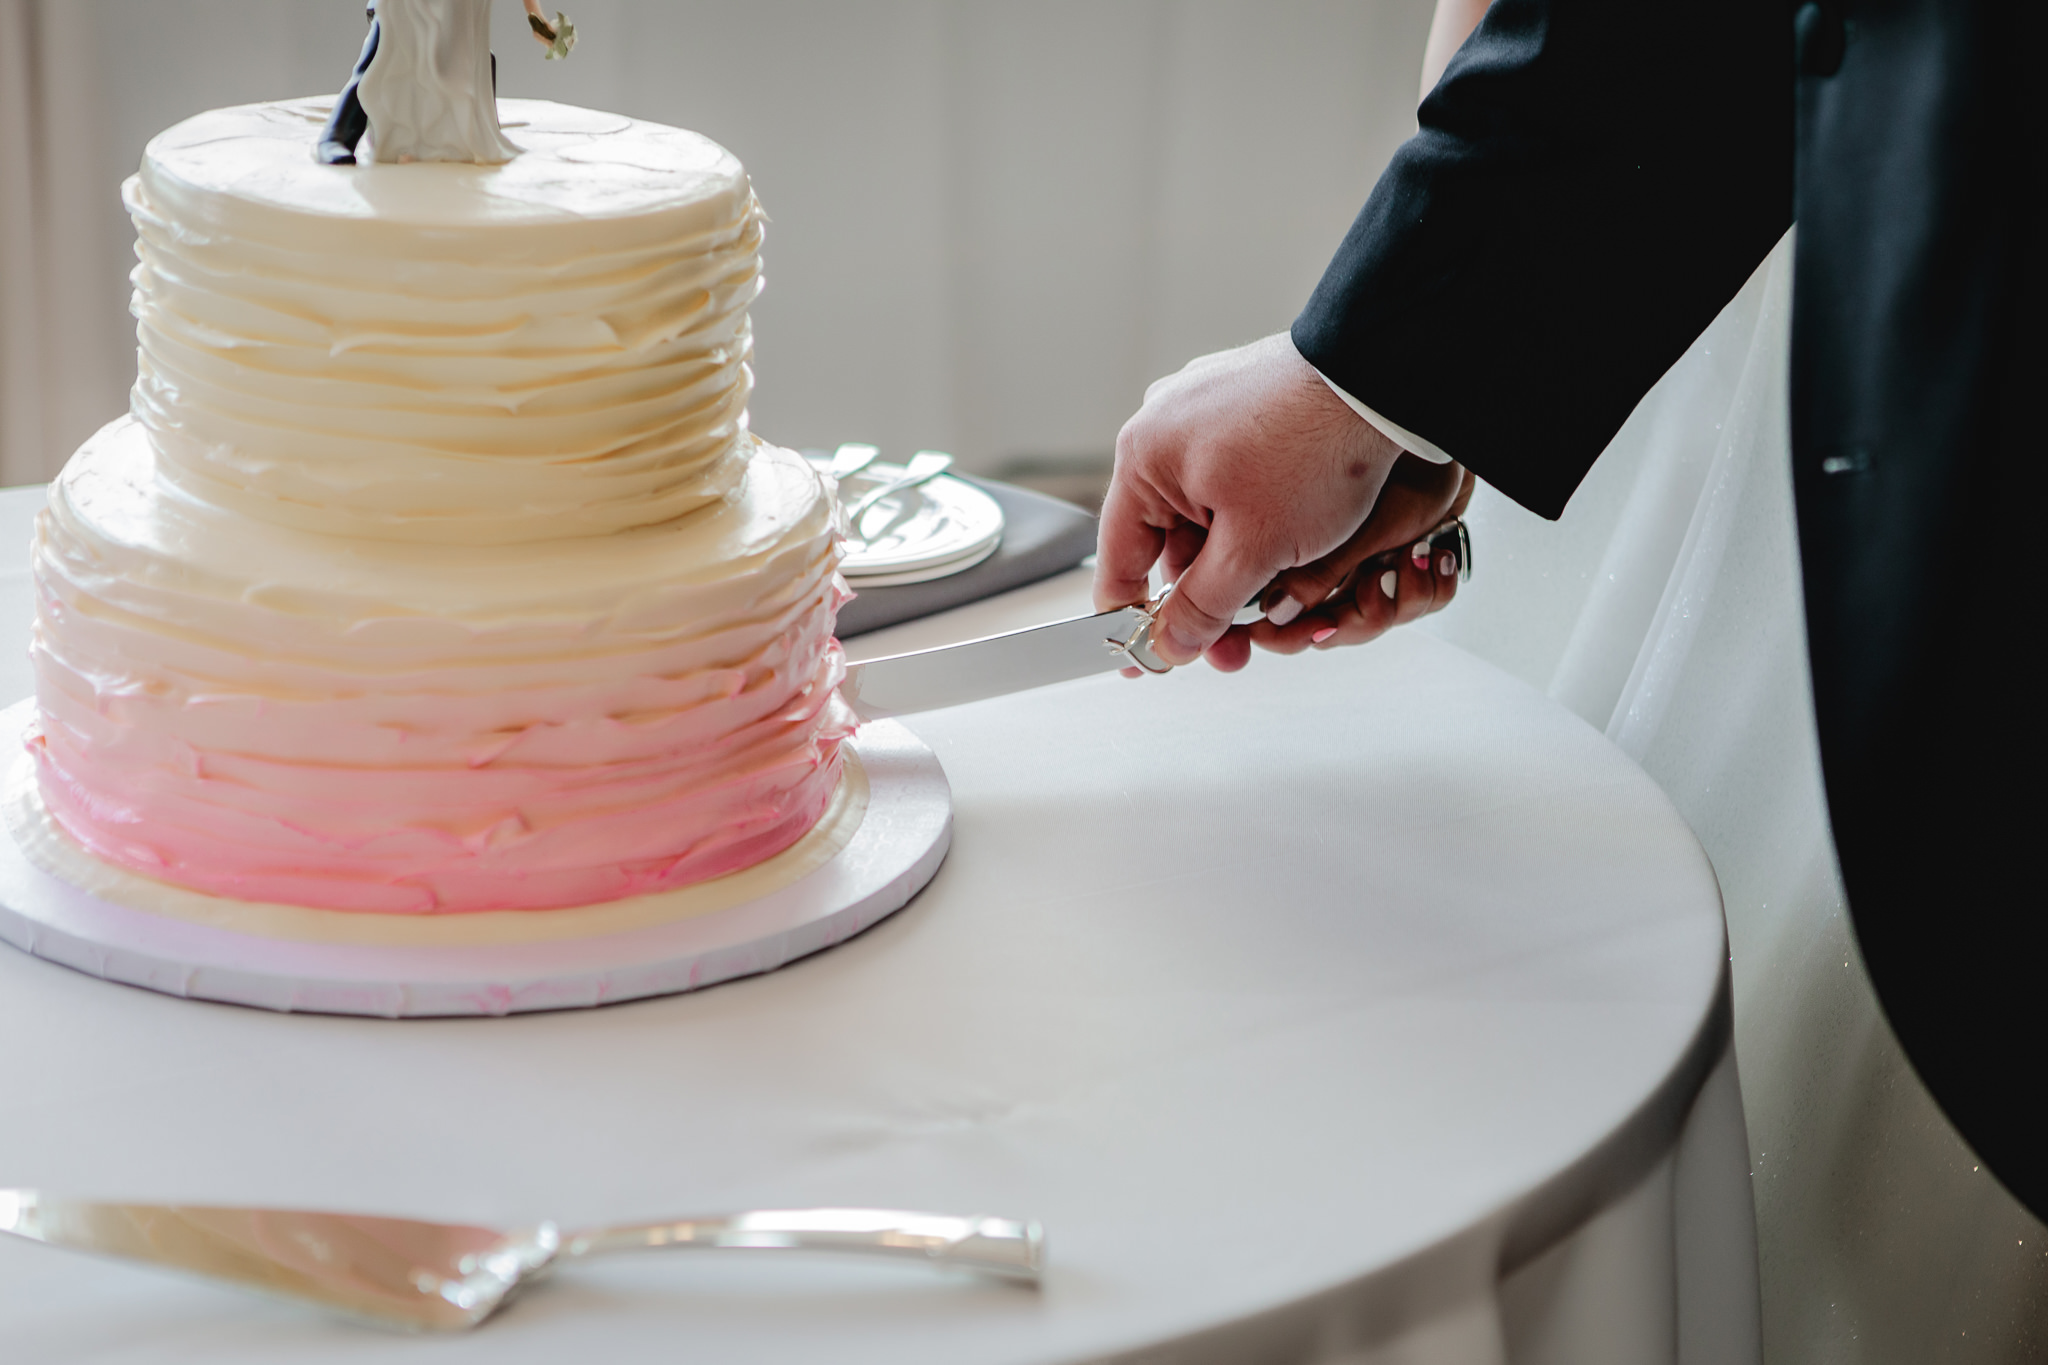 Caking cutting during a Duquesne University wedding reception